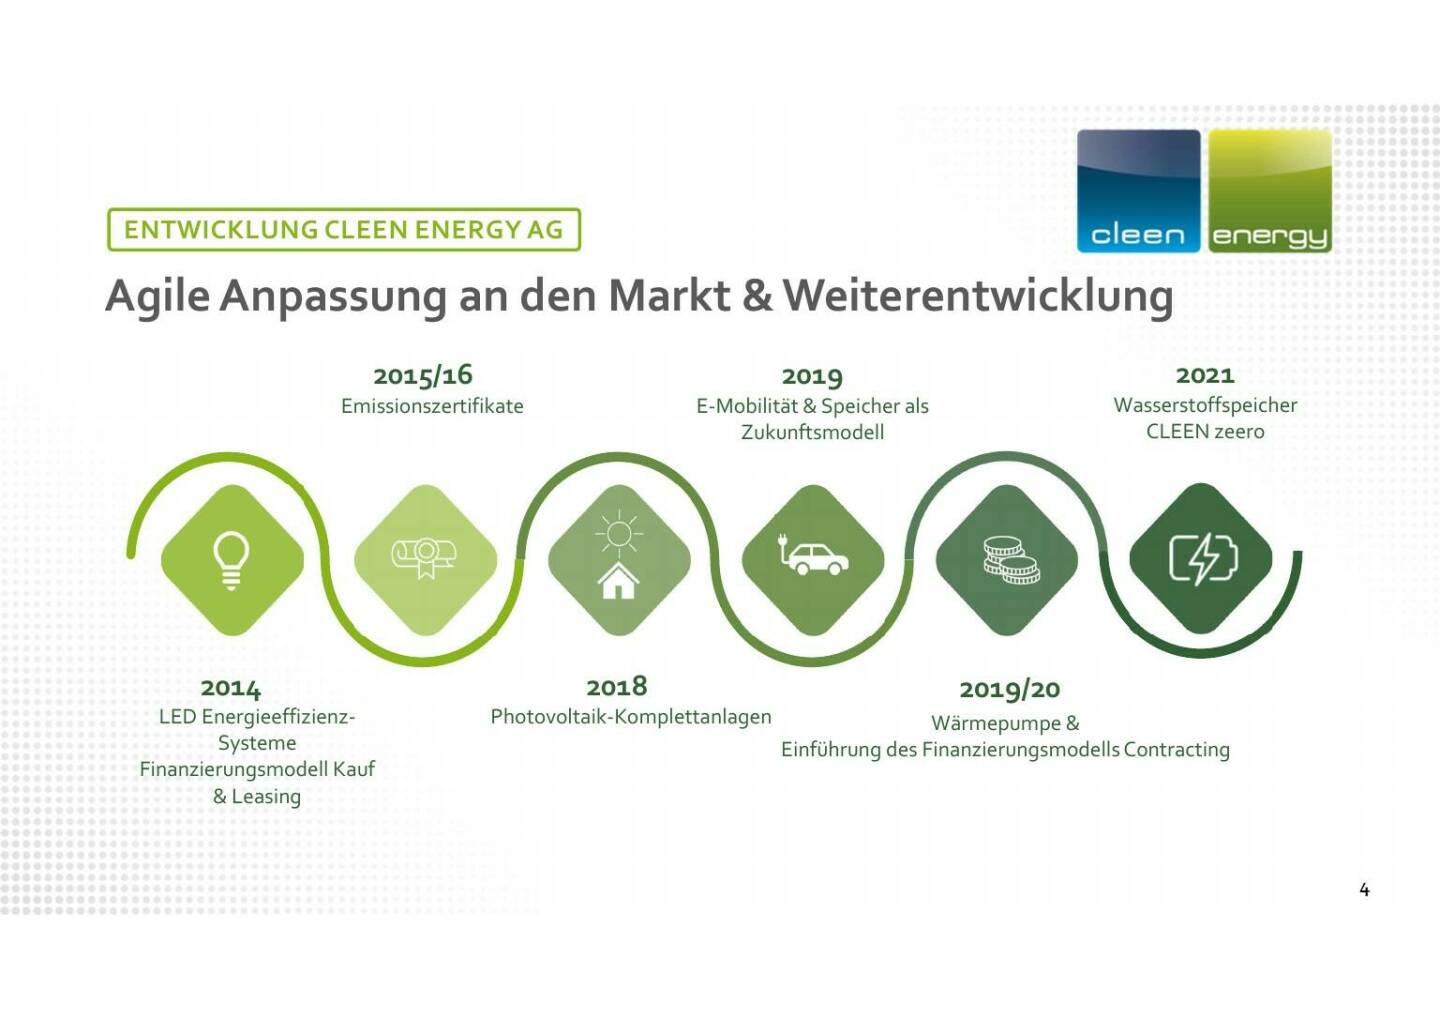 Cleen Energy - Entwicklung Cleen Energy AG